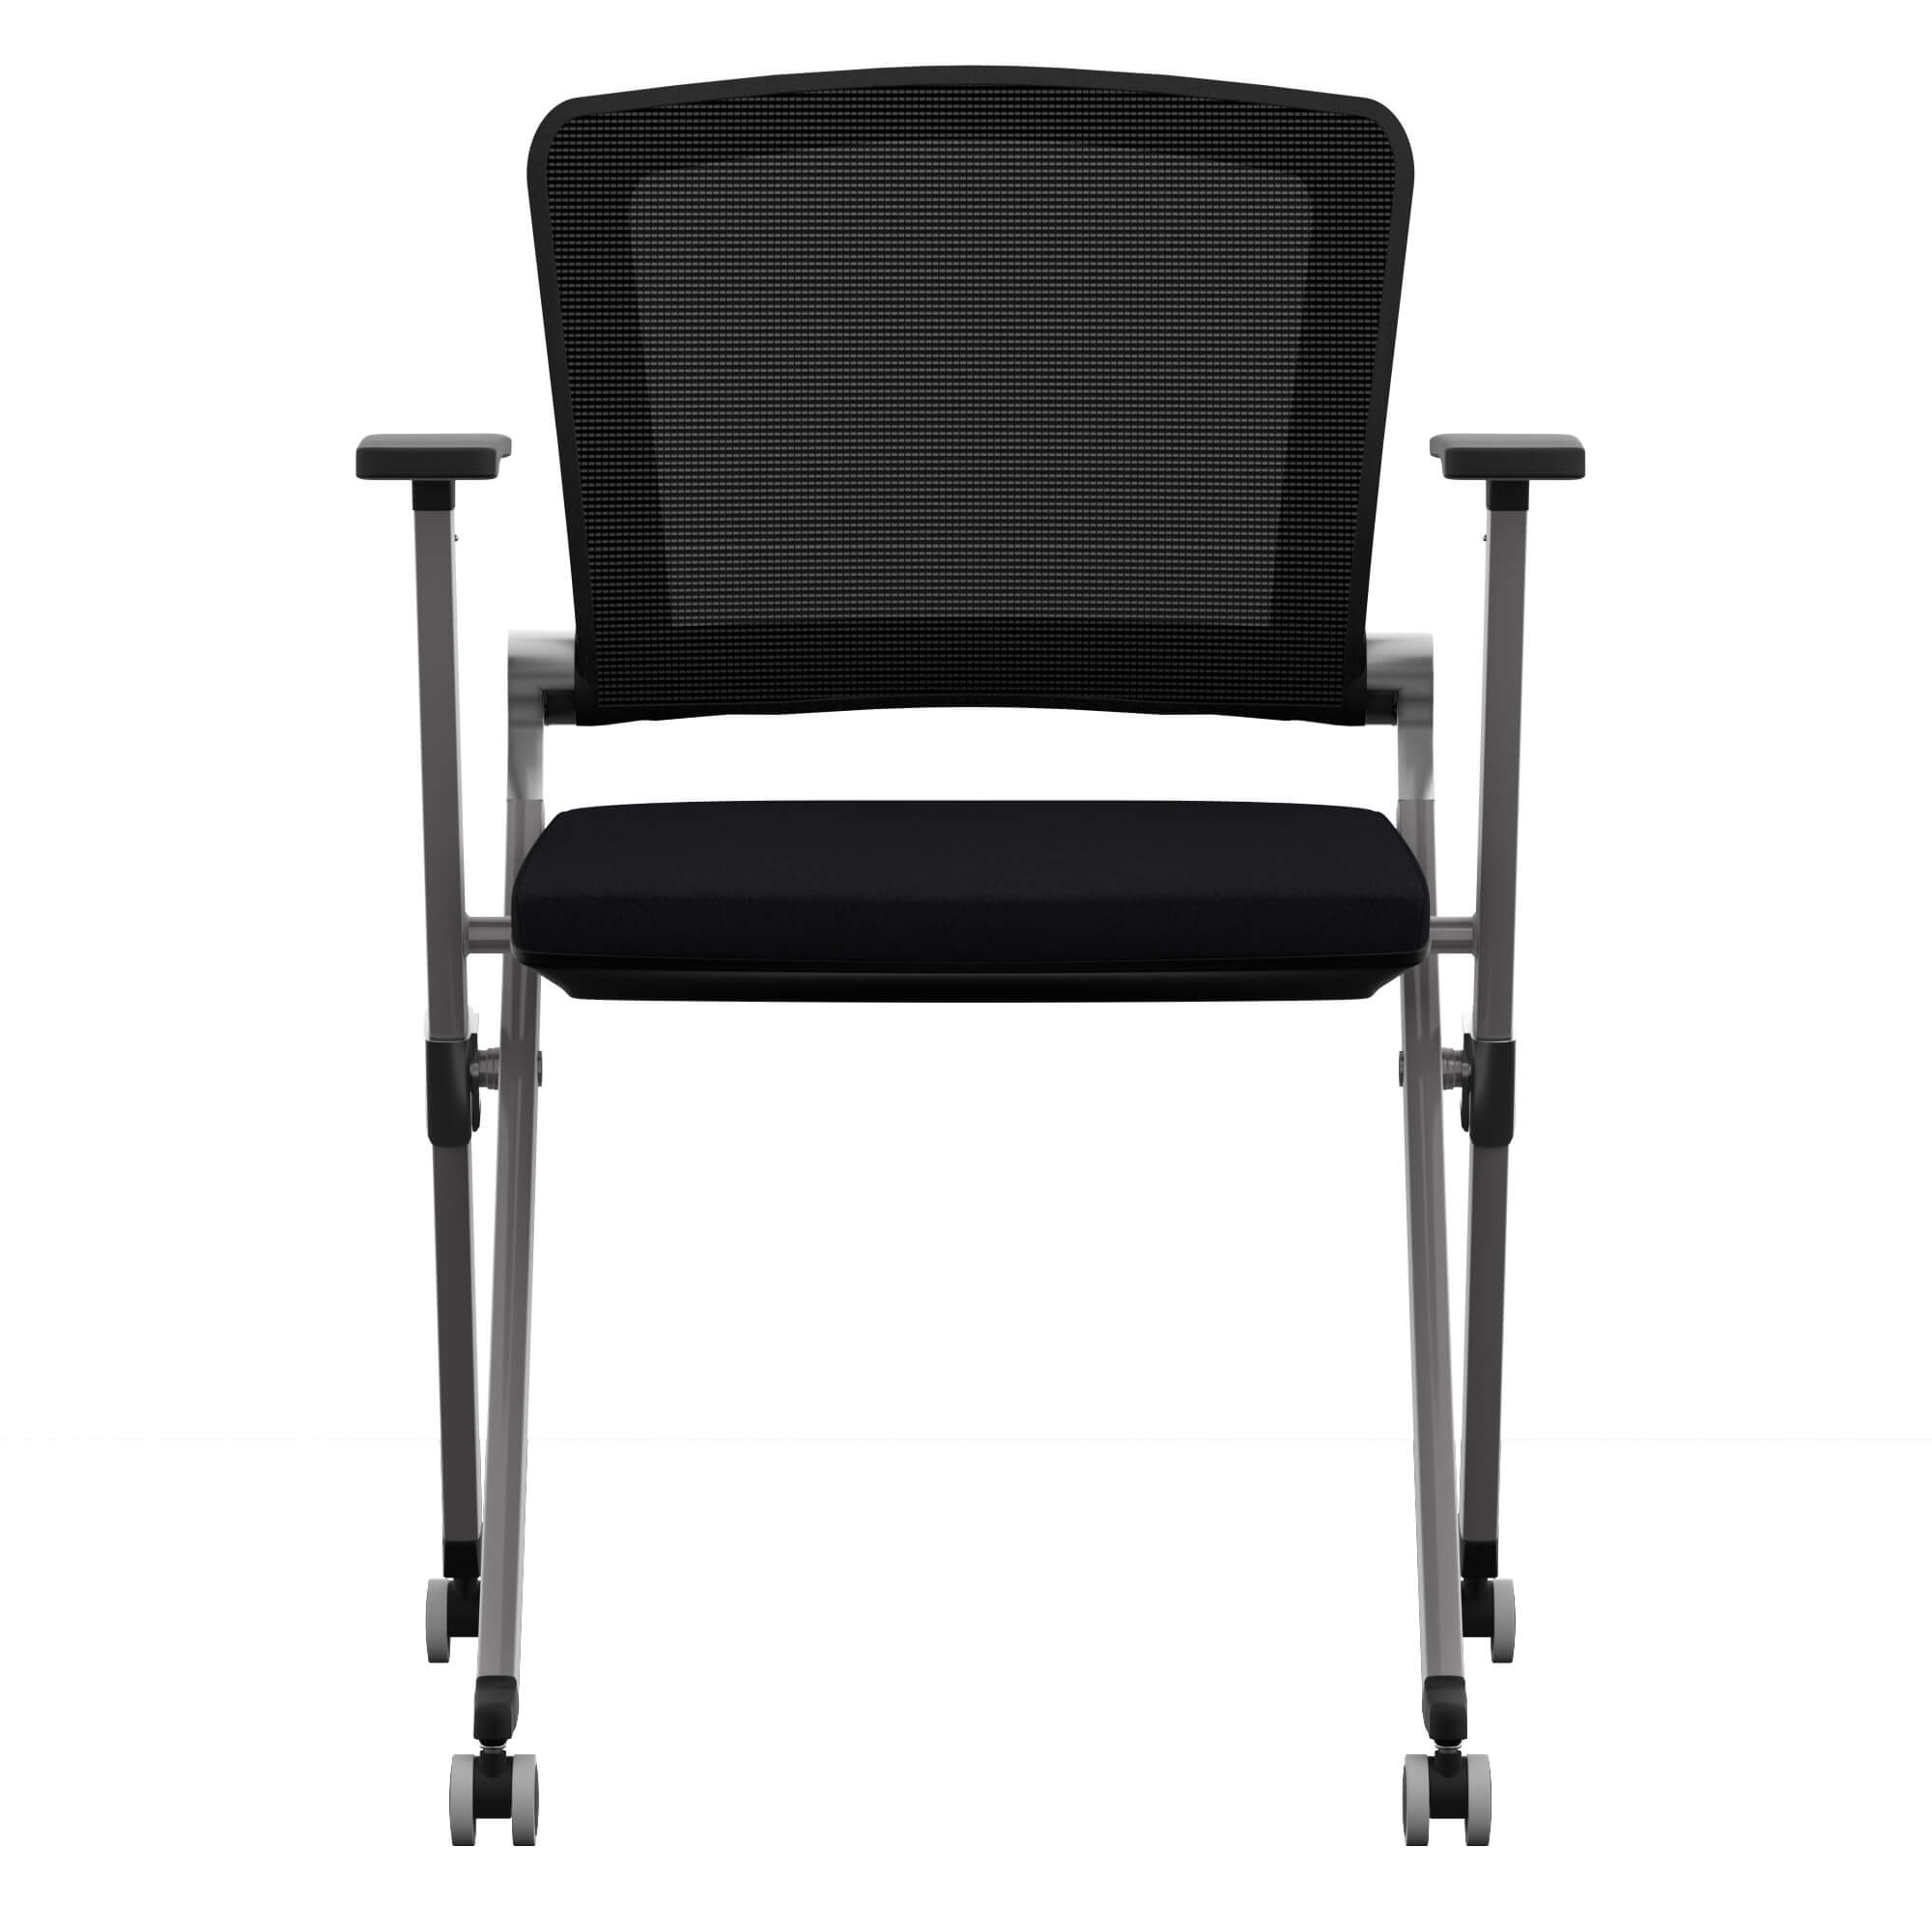 Folding office chair front view 1